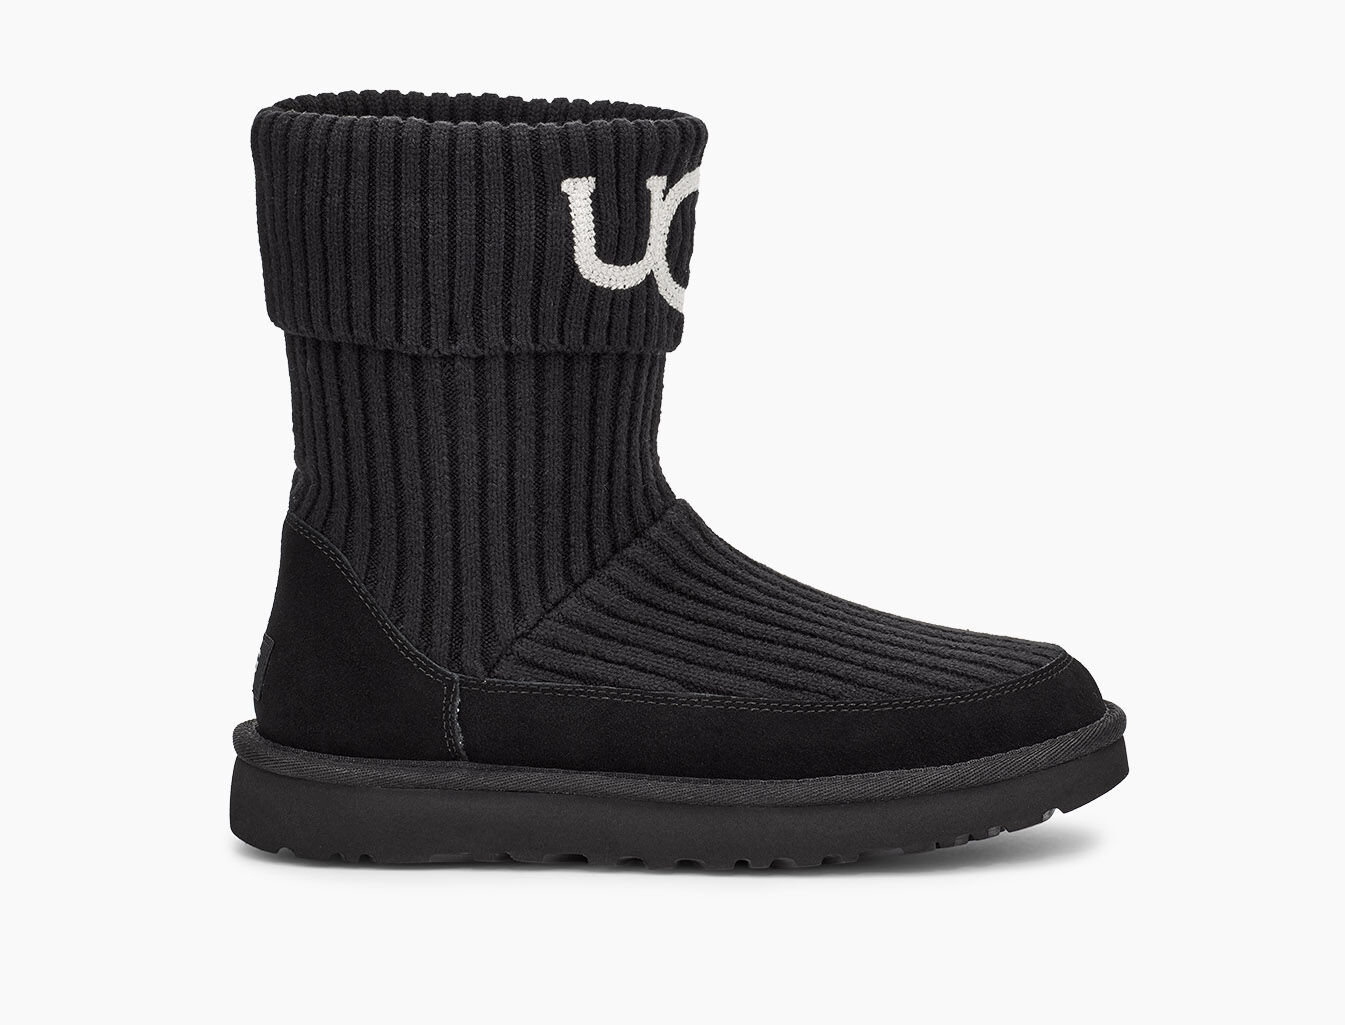 uggs knit boots sale